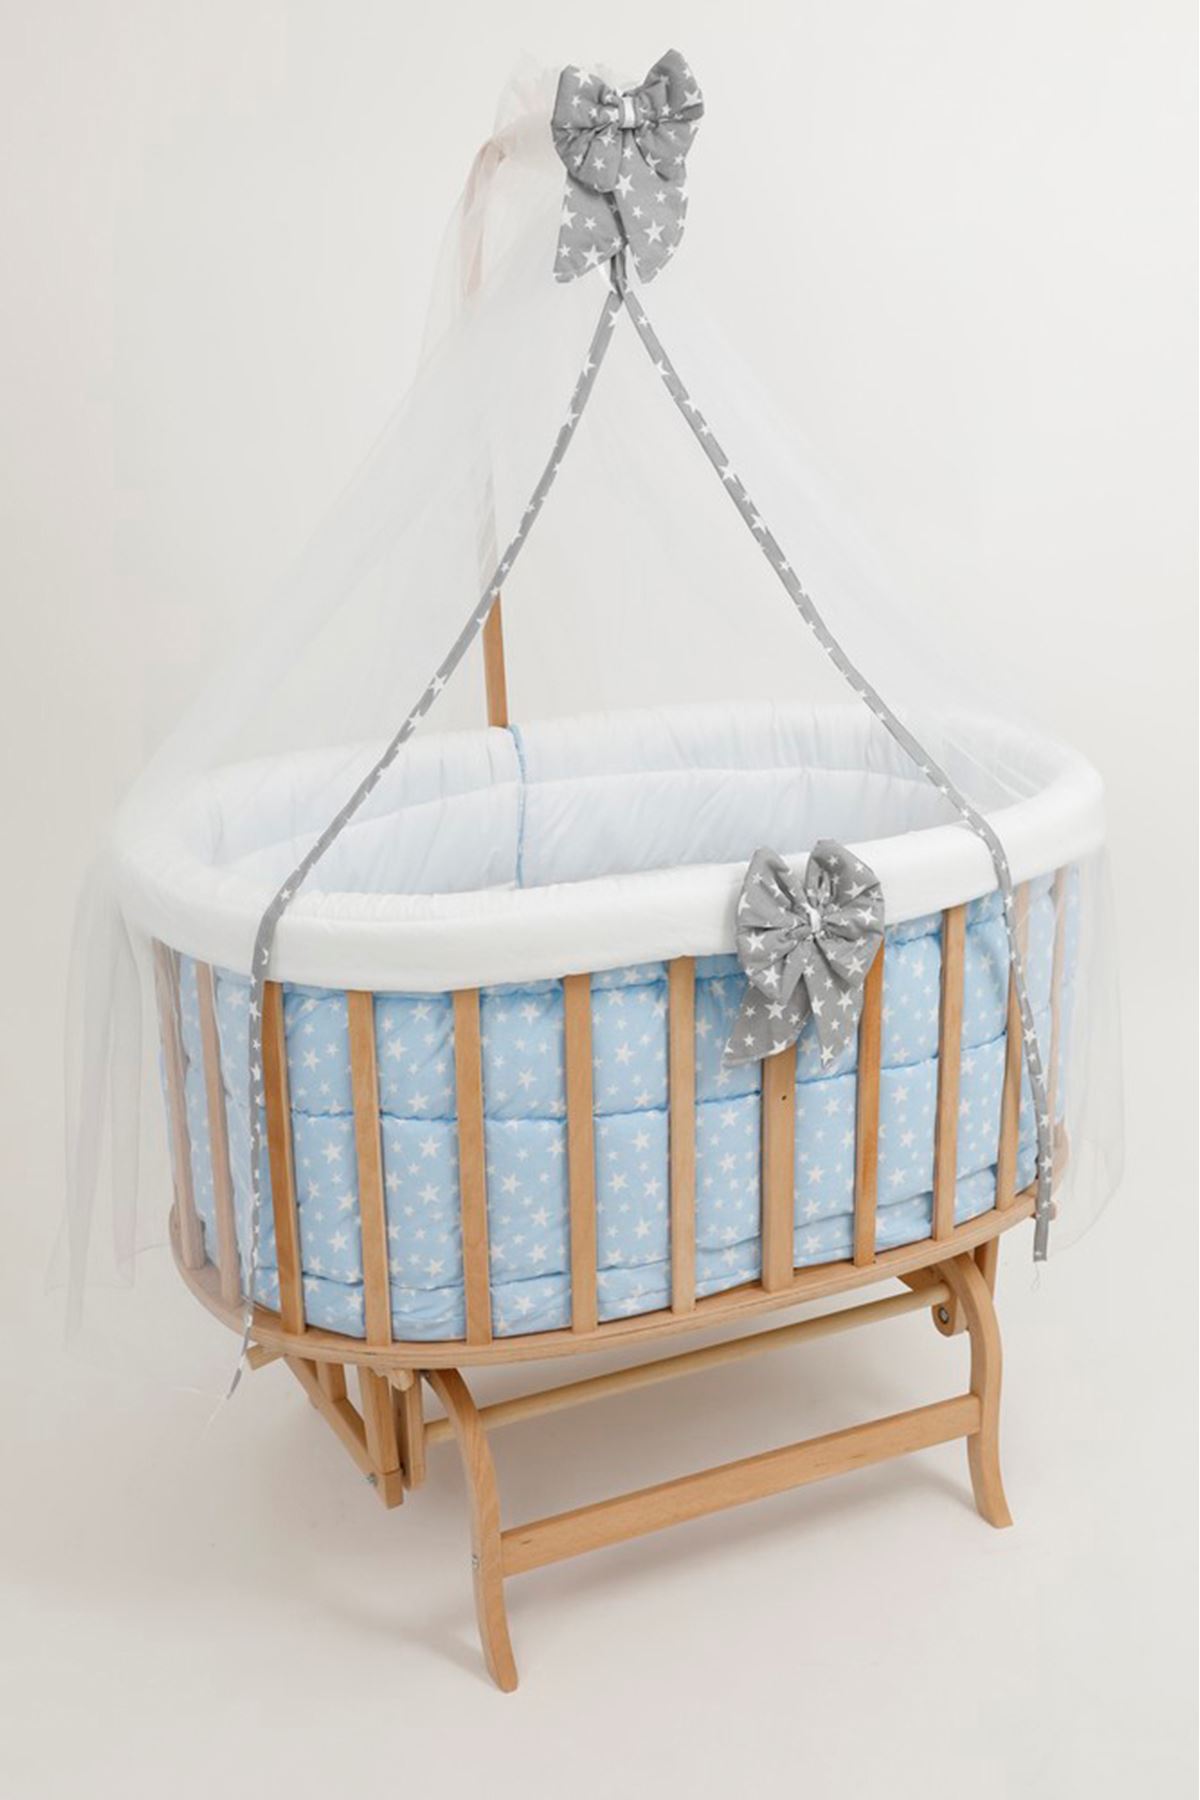 Wooden Baby Cot with Blue Gray Star Sleeping Set